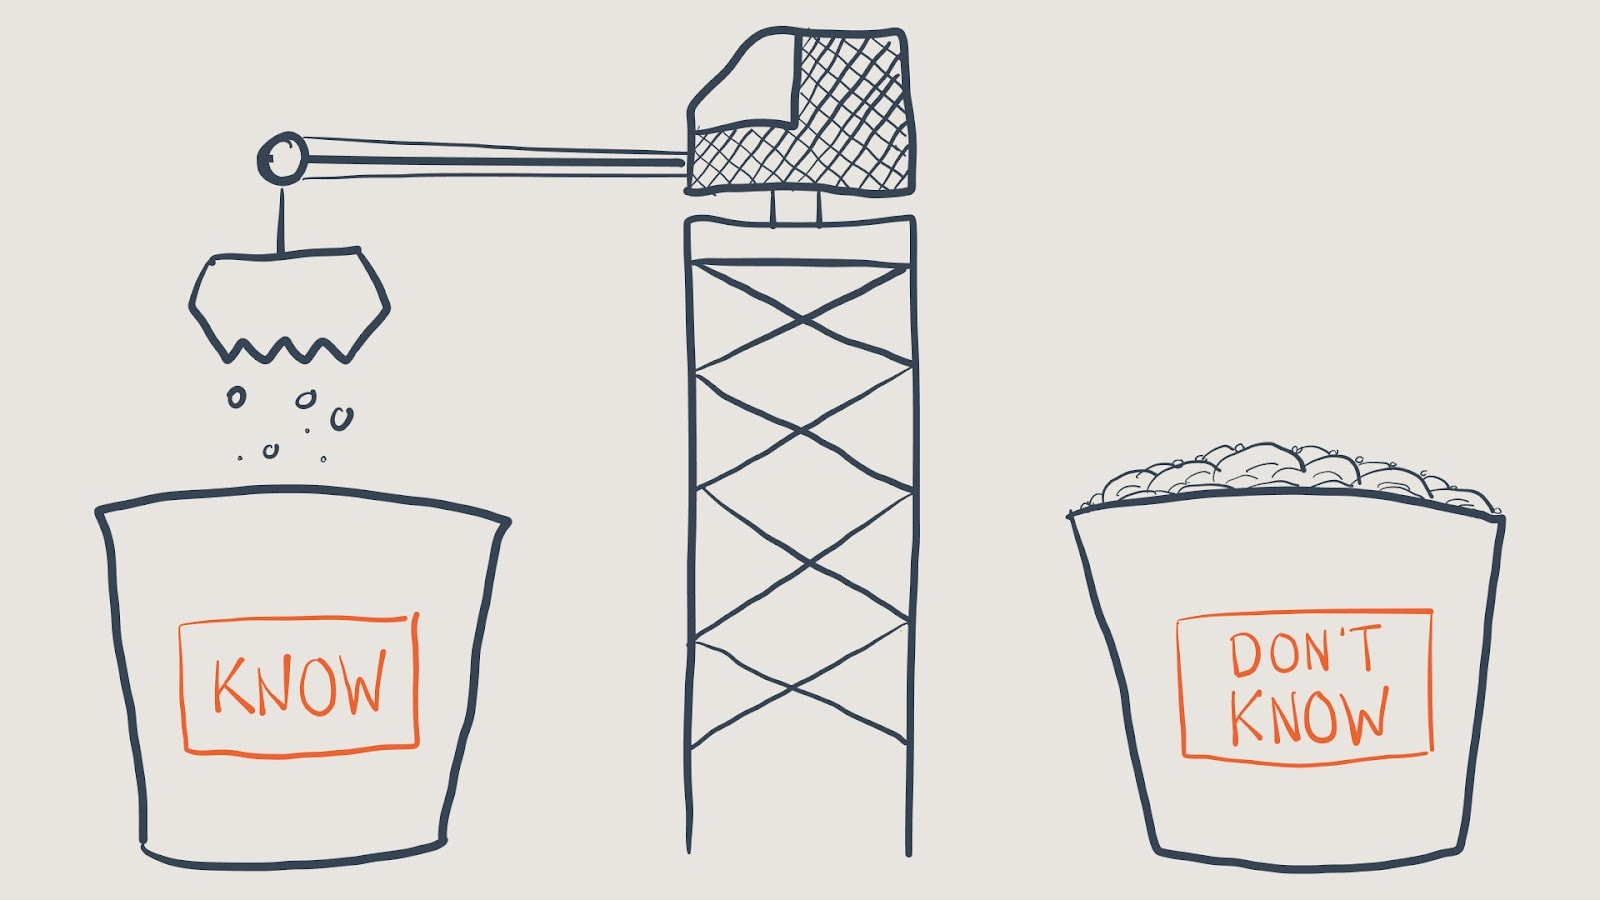 A line drawing of a crane standing between two buckets. The right bucket is overlowing and has the label 'don't know'. The left bucket is labeled 'know'. The crane is dumping a small amount of debris into the 'know' bucket.